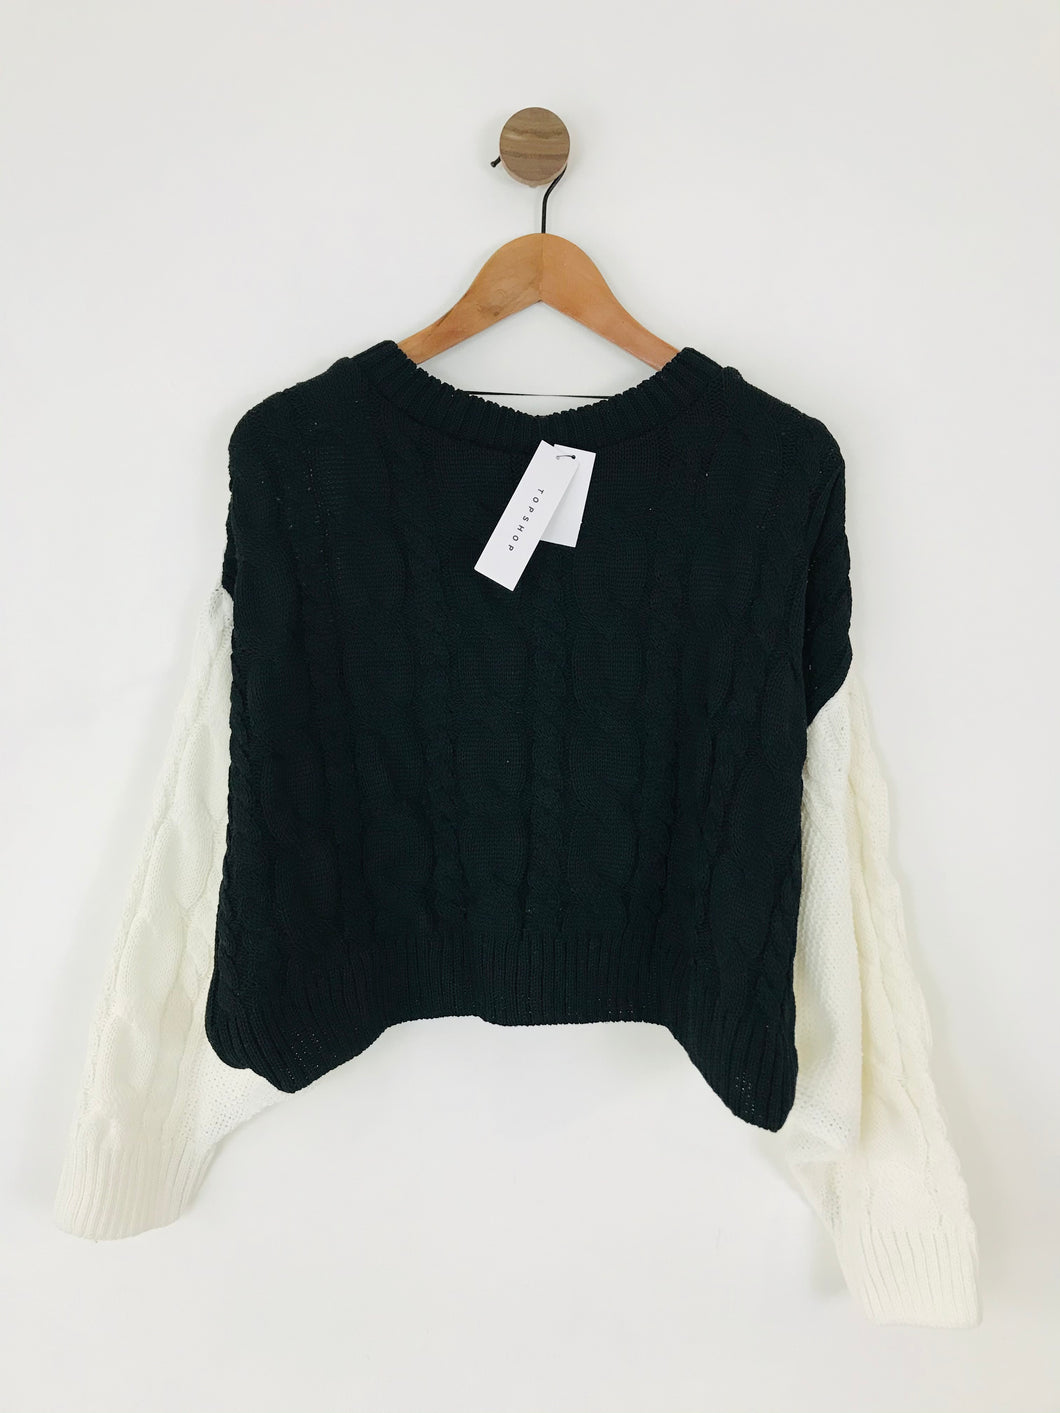 Topshop Women’s Oversized Cable Knit Cropped Jumper NWT | S/M UK8-10 | Black